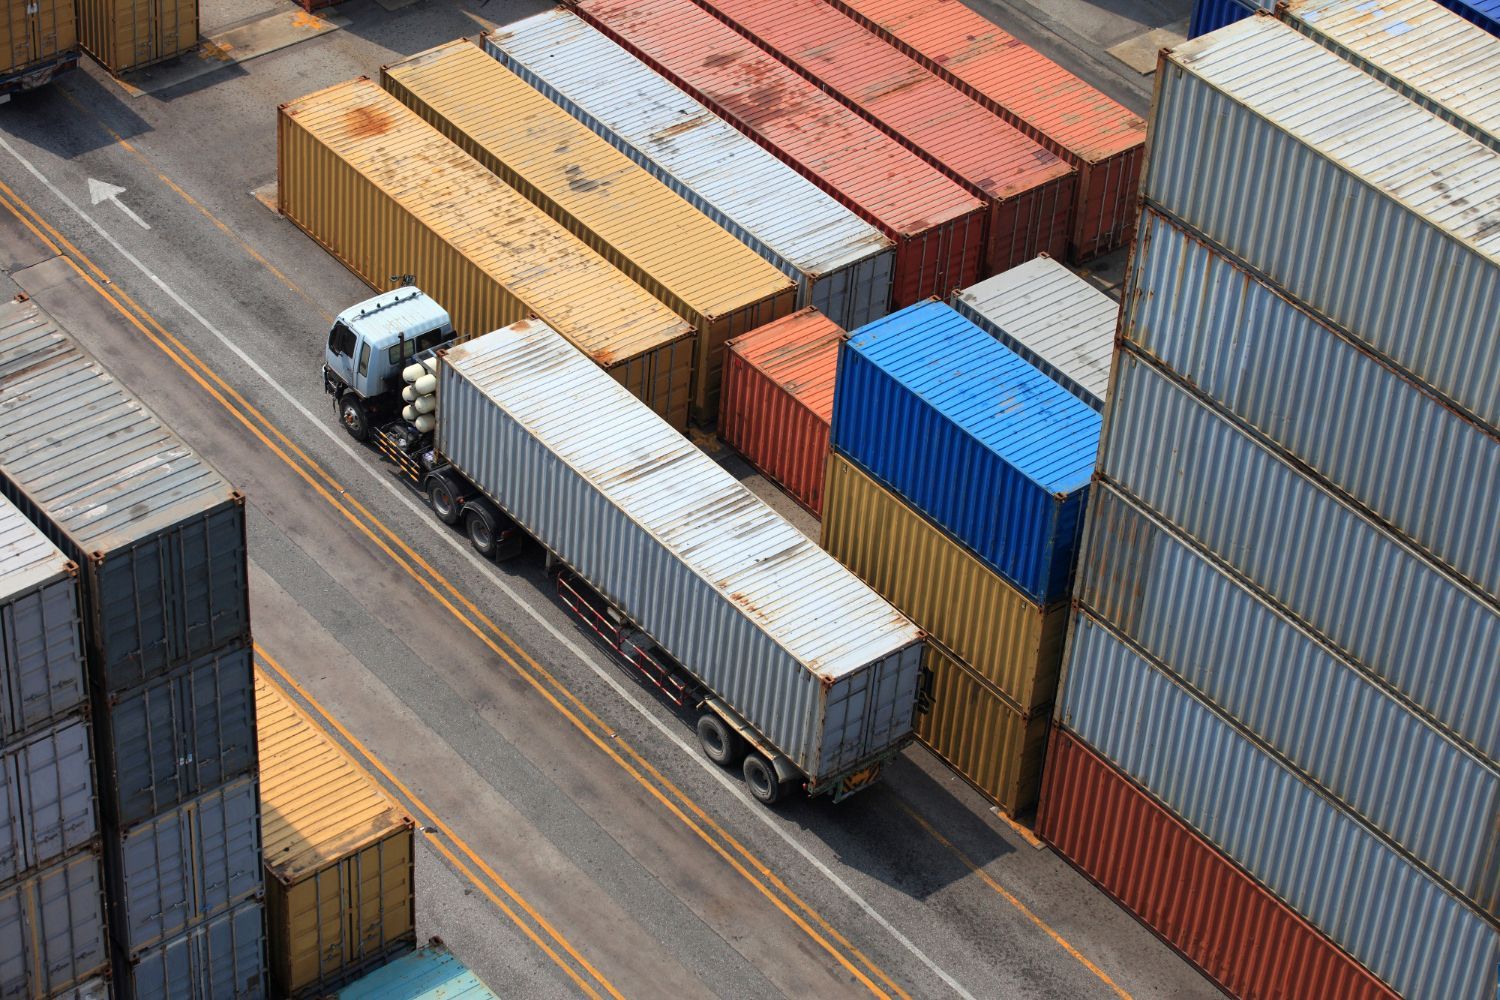 An aerial view of a truck driving past a row of shipping containers.